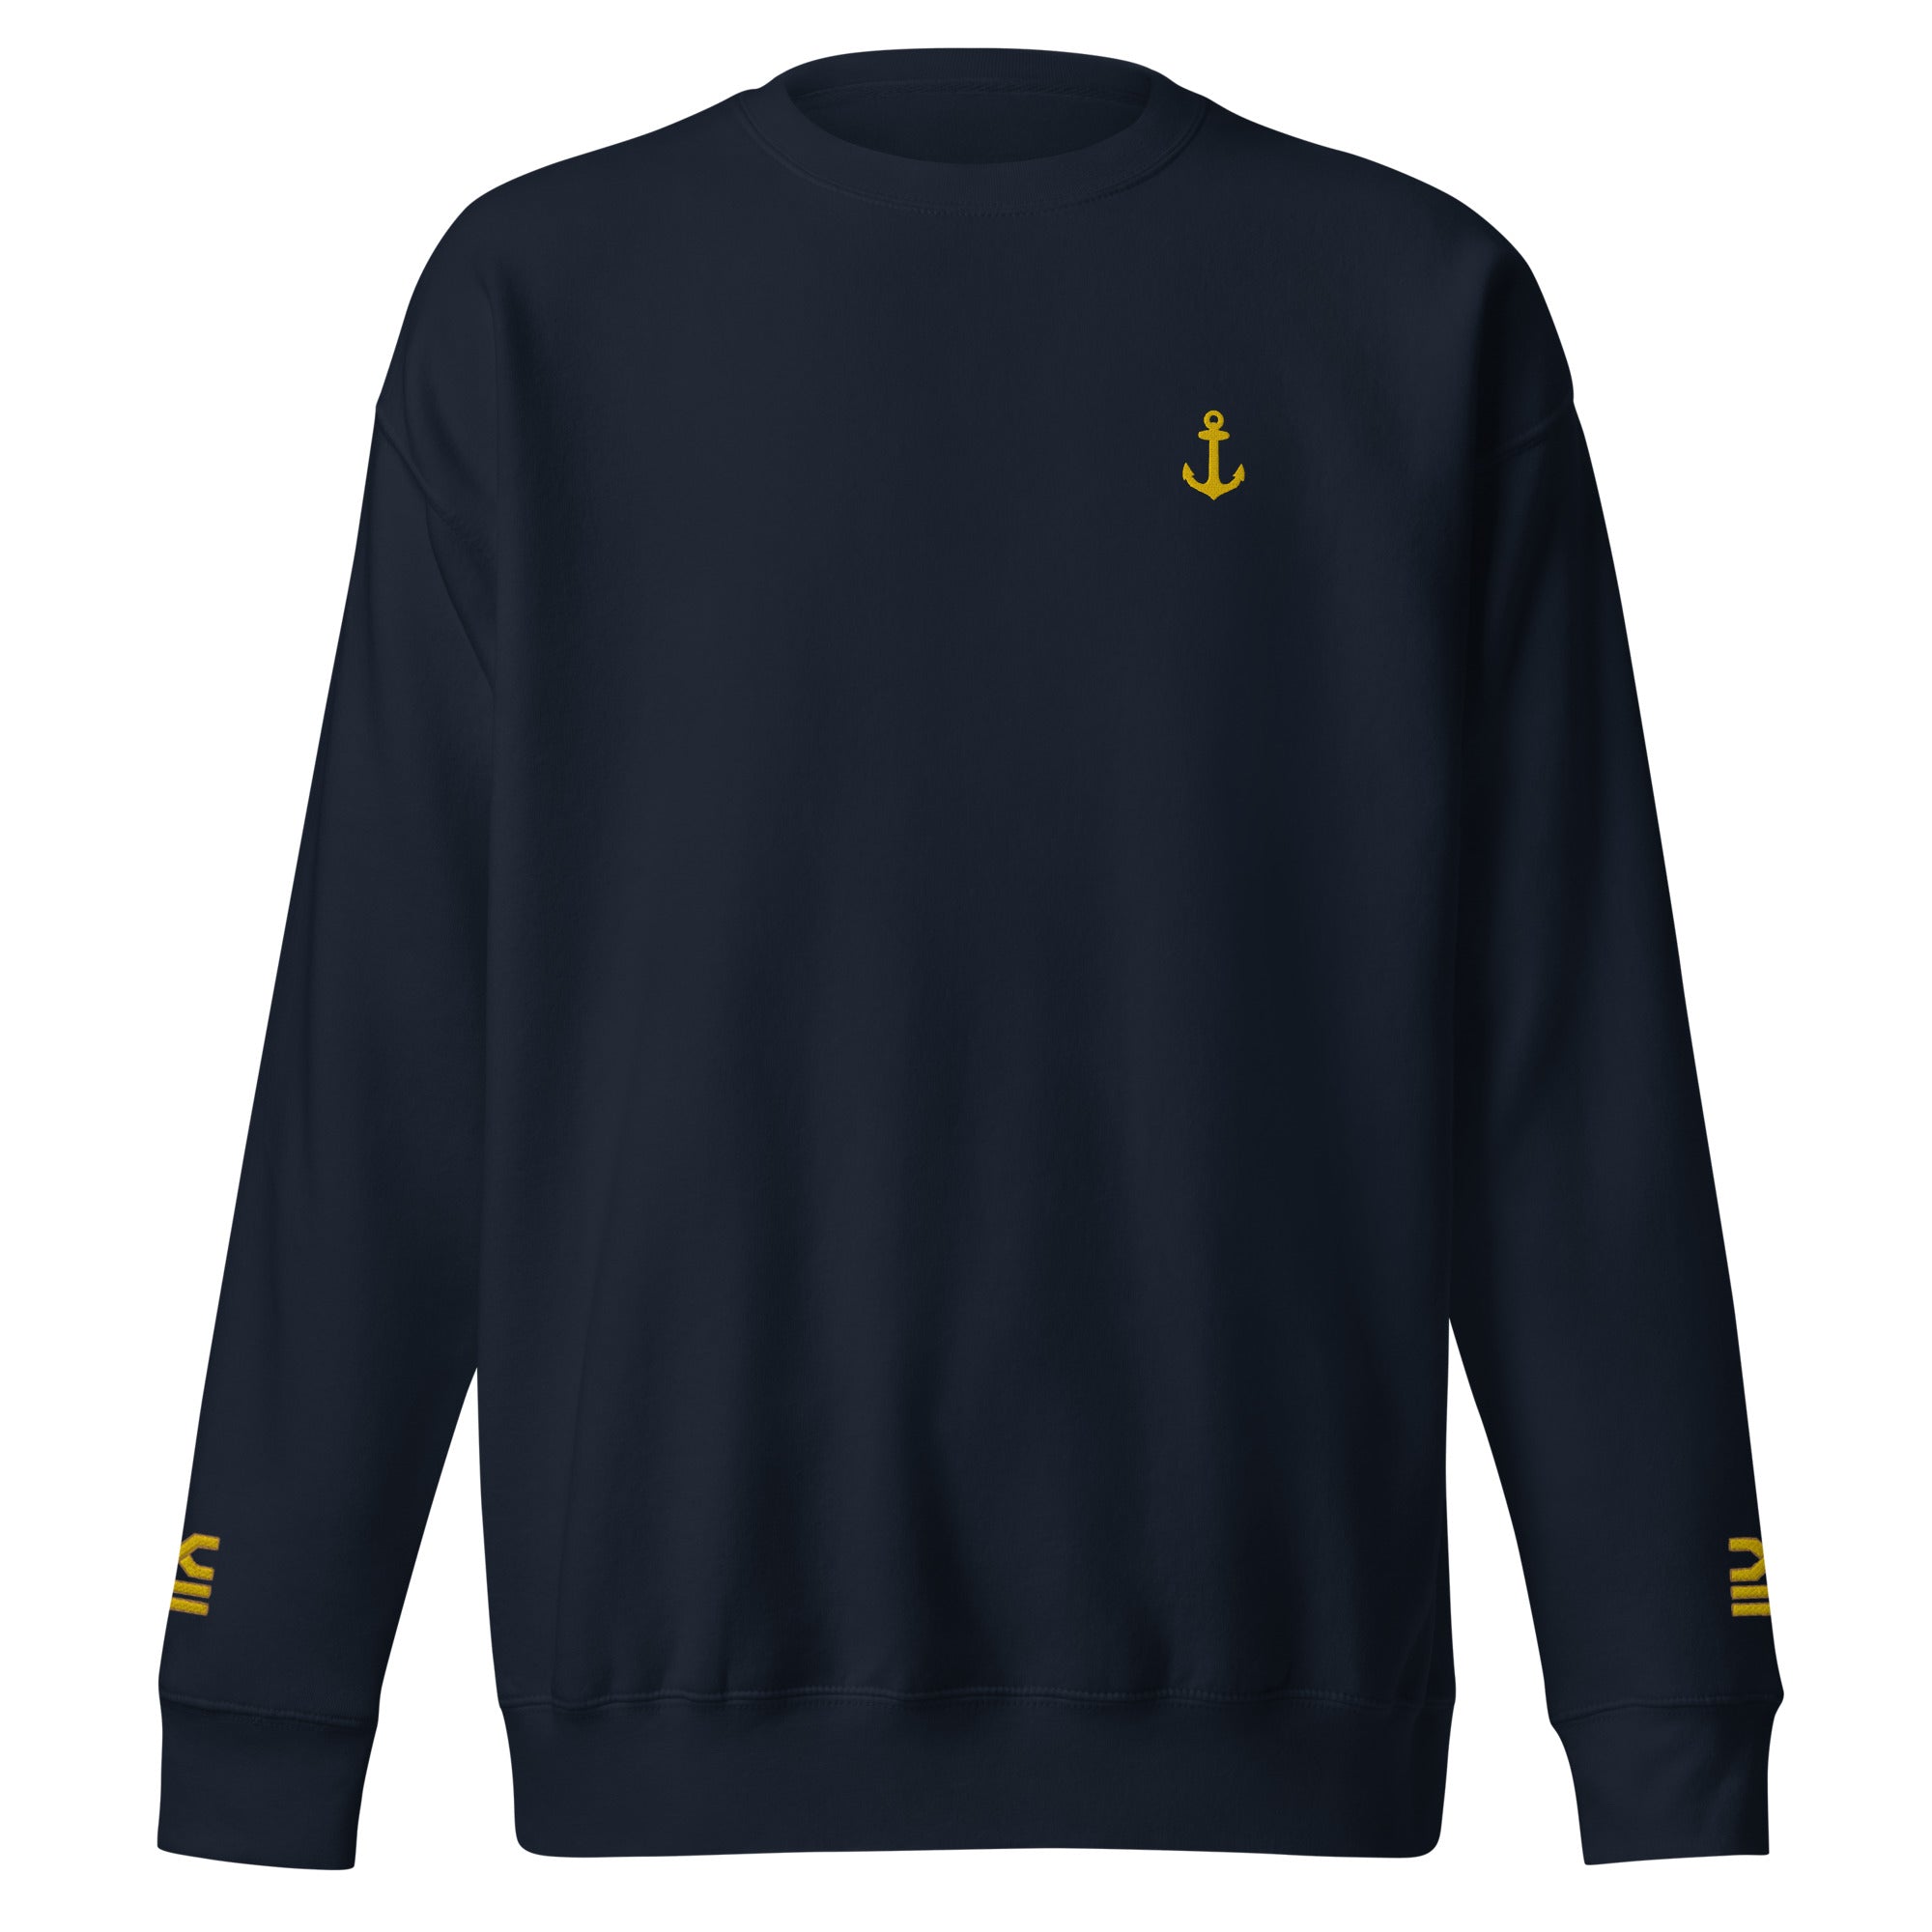 Captain sweatshirt with Left chest, sleeves Embroidery. (Choose epaulettes type)